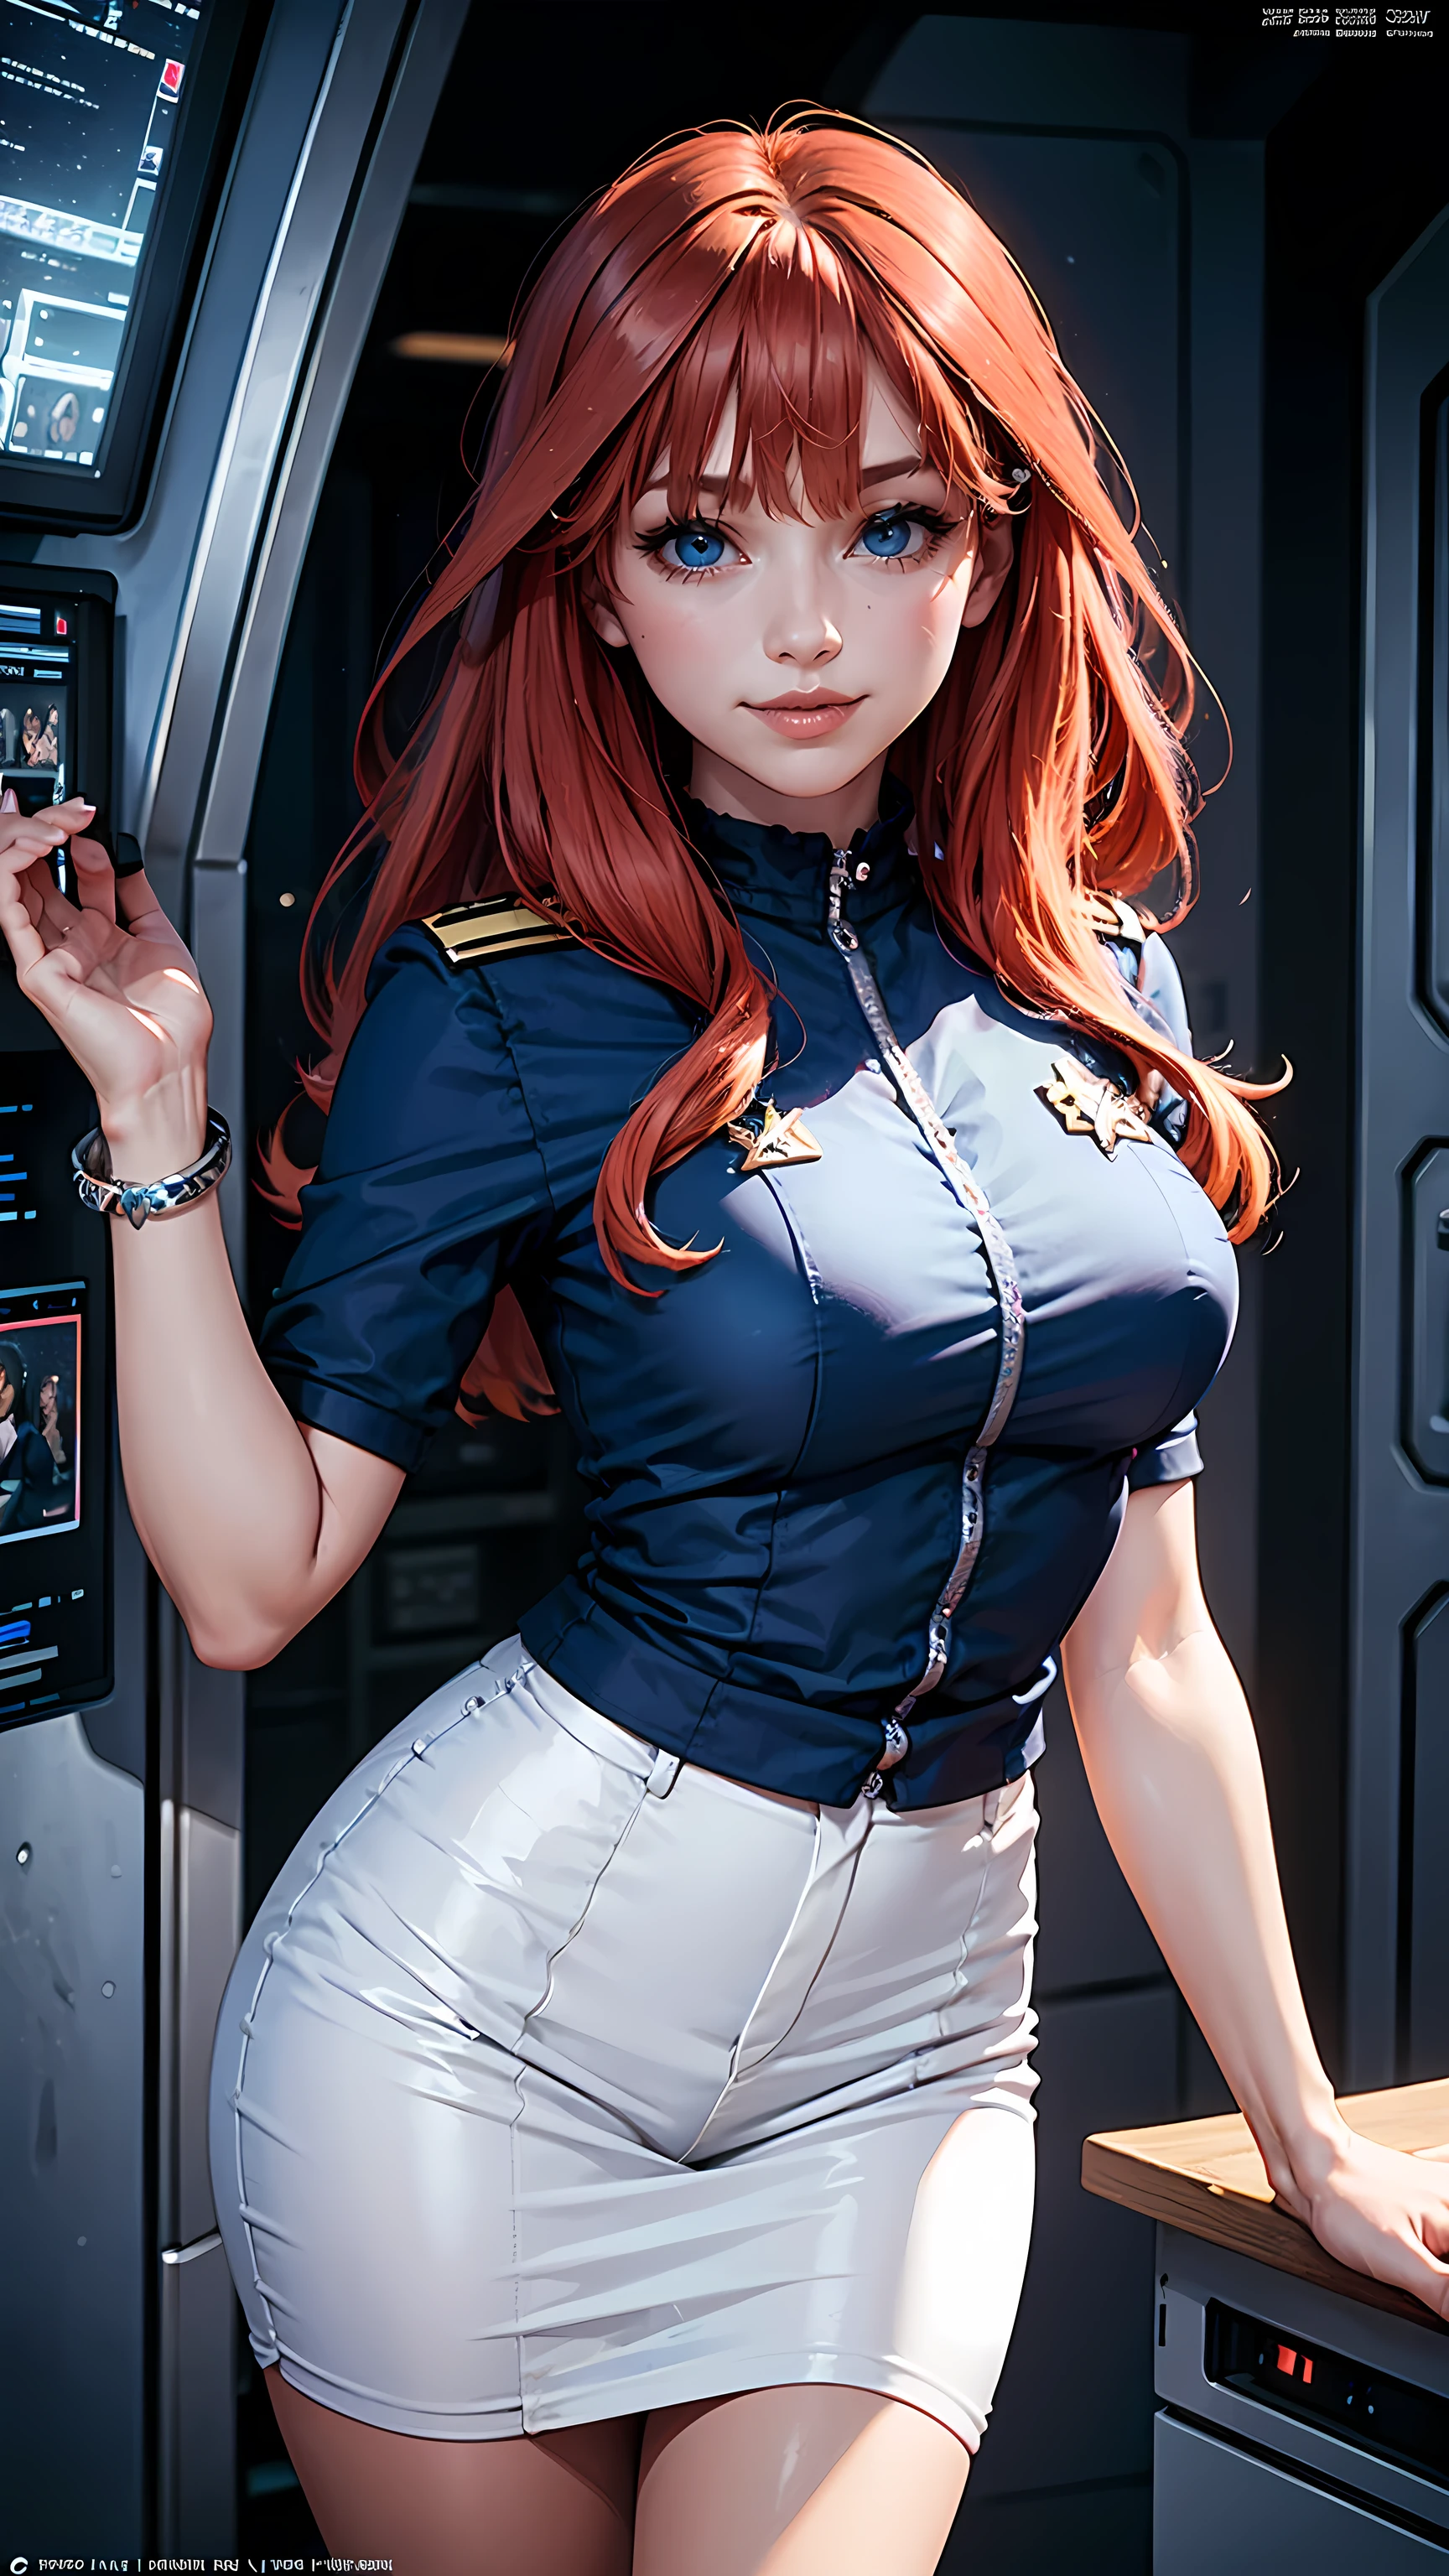 Beautiful red hair woman is shown to have a sexy figure, She is wearing classic trek blue uniform, jewelry, she has blue eyes, smile tease look, Girl standing on a command bridge of a starship, sexy session, poseing, portrait, superior quality, many details, realistic